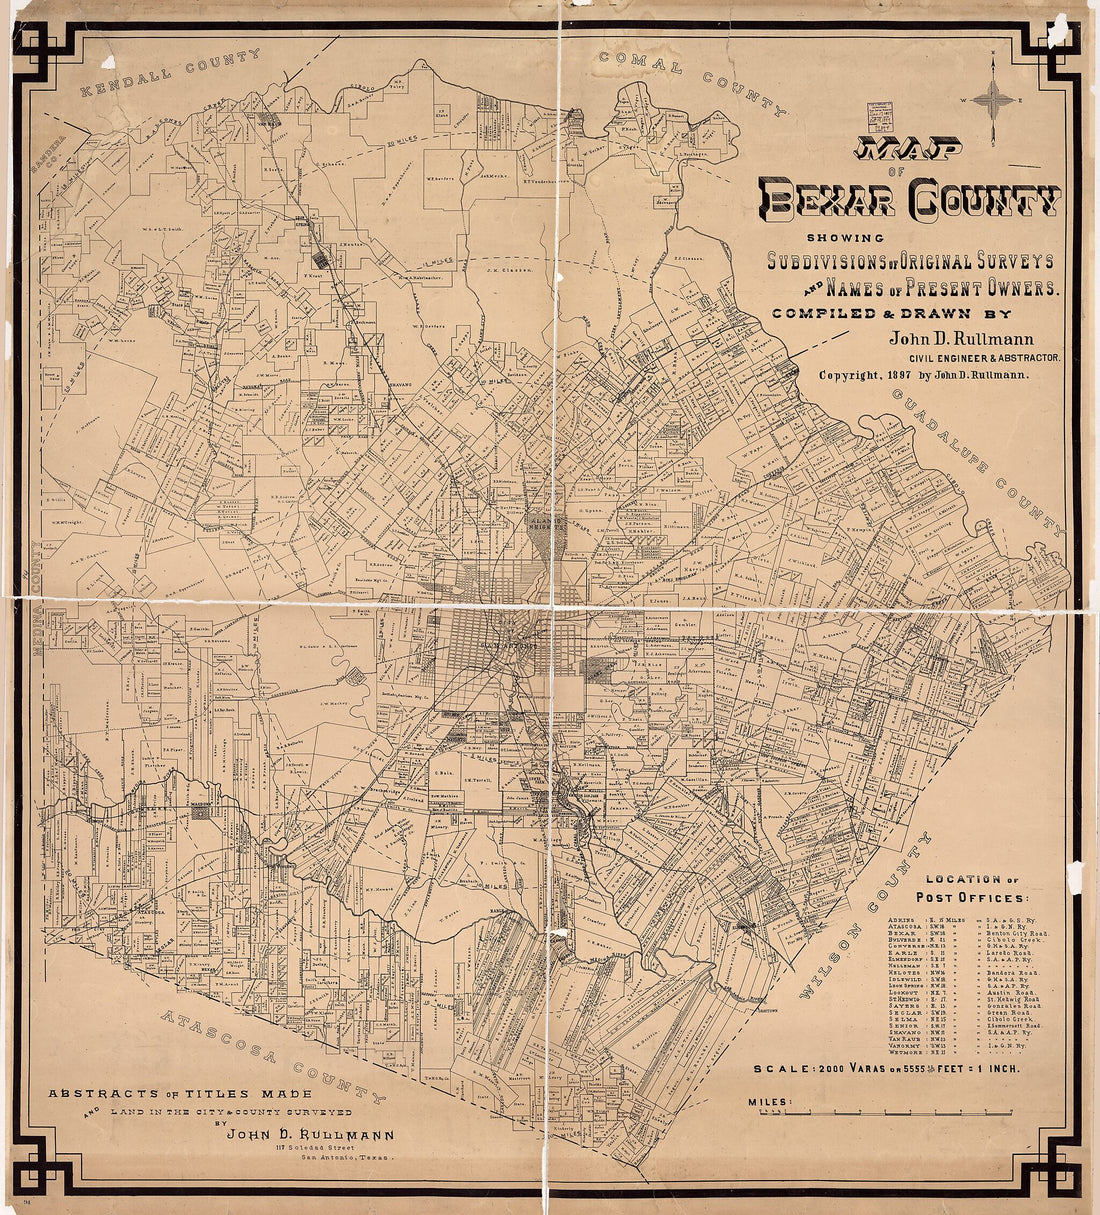 This old map of Map of Bexar County : Showing Subdivisions of Original Surveys and Names of Present Owners from 1897 was created by John D. Rullmann in 1897